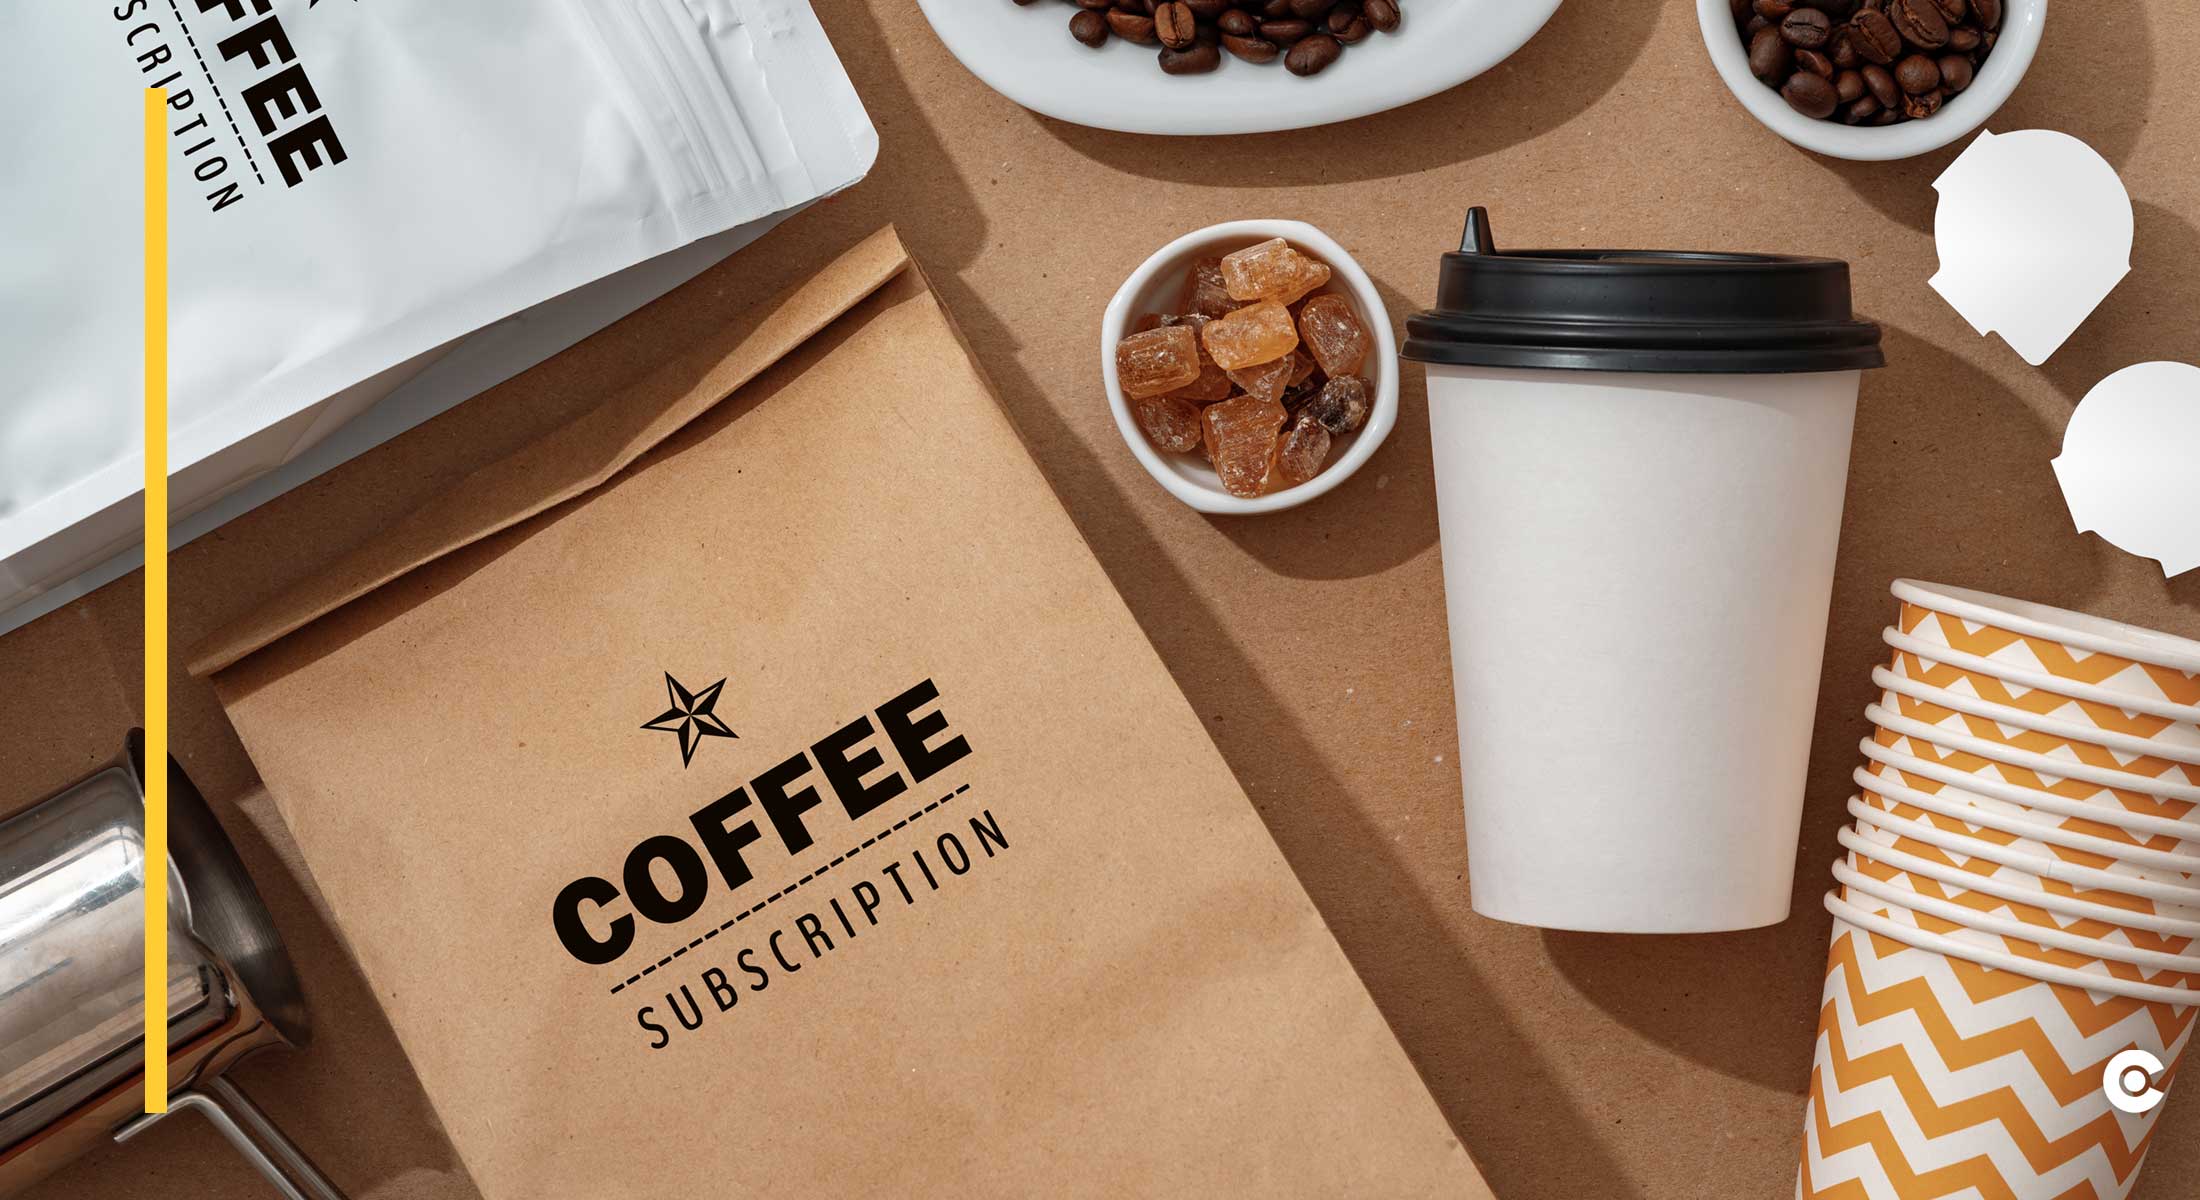 A brown bag with "Coffee Subscription" logo lays on a table with coffee beans.